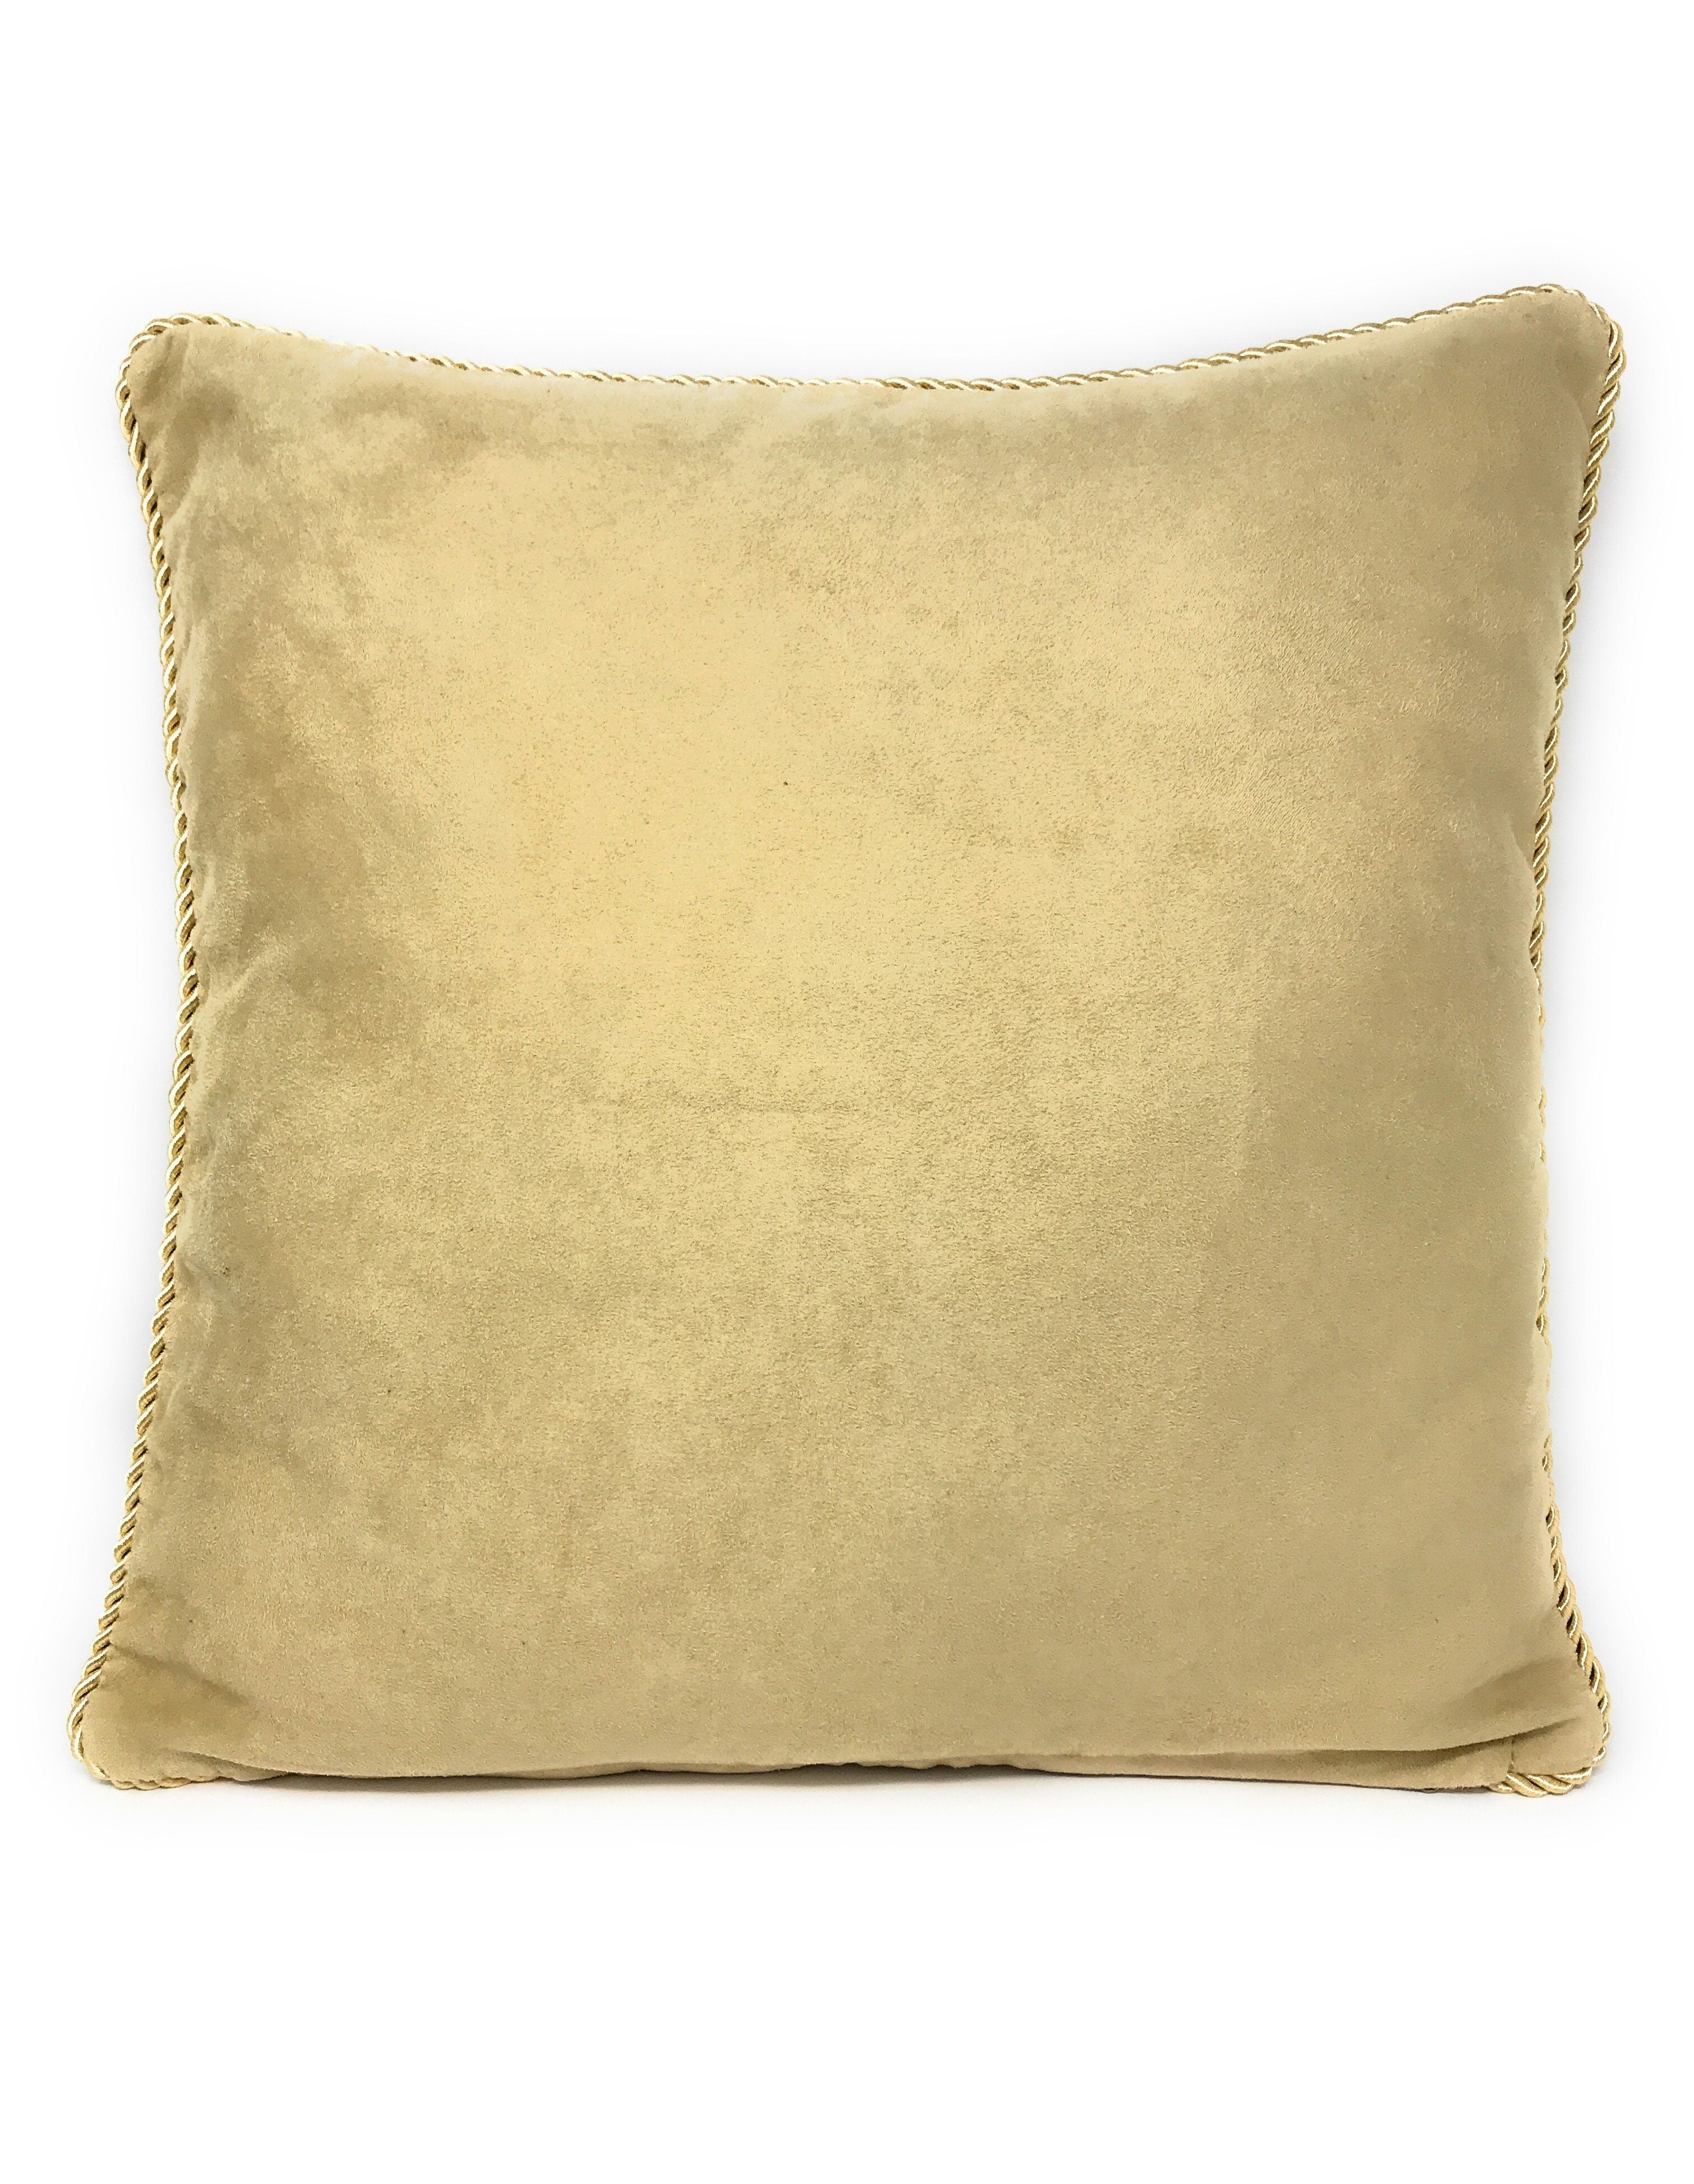 Spice Postage Stamp Rectangle Decorative Pillow